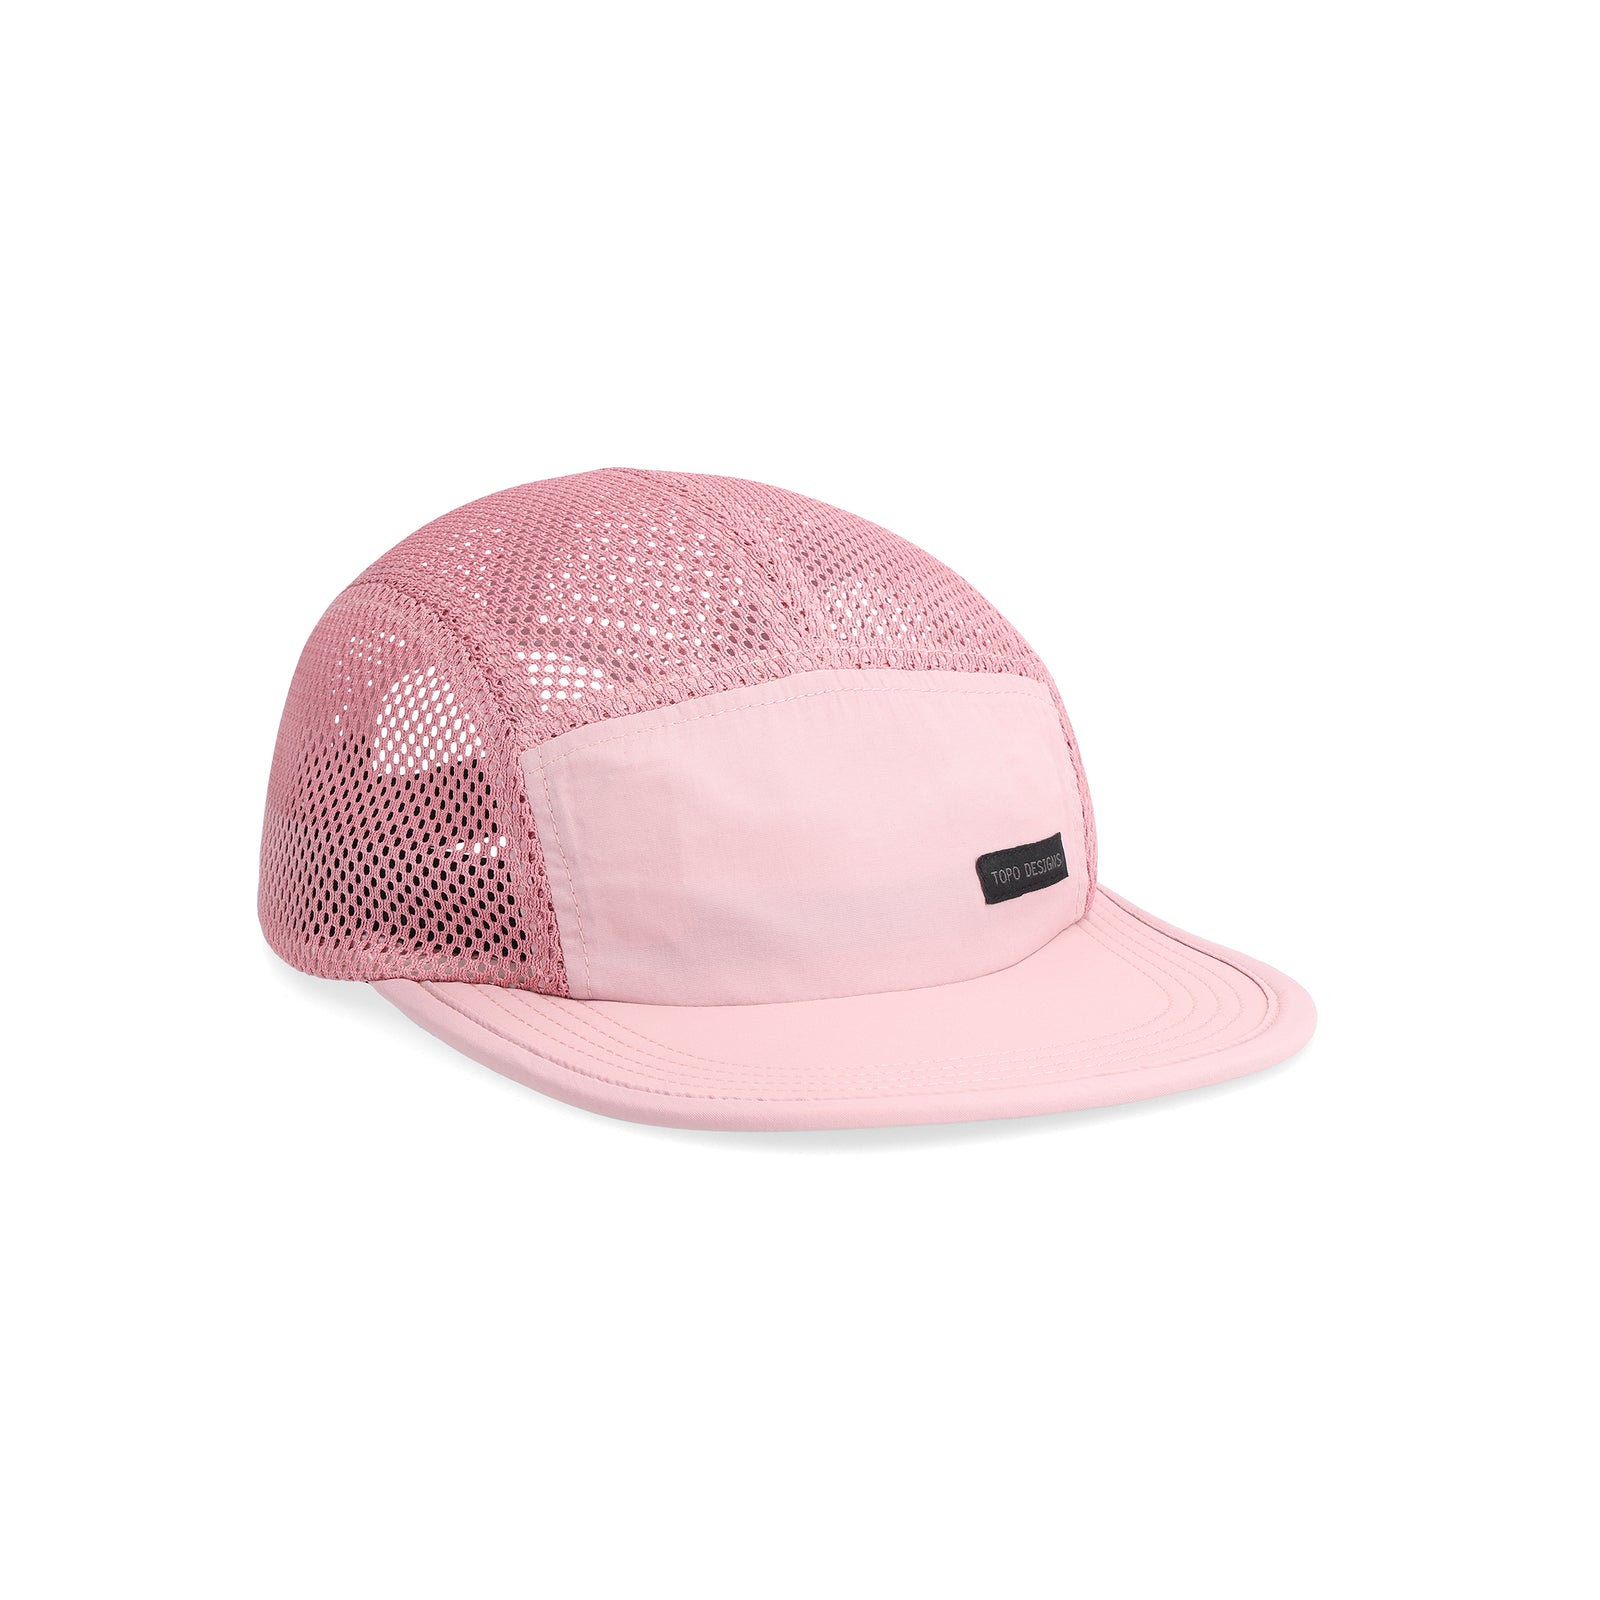 Front View of Topo Designs Global Hat in "Rose"